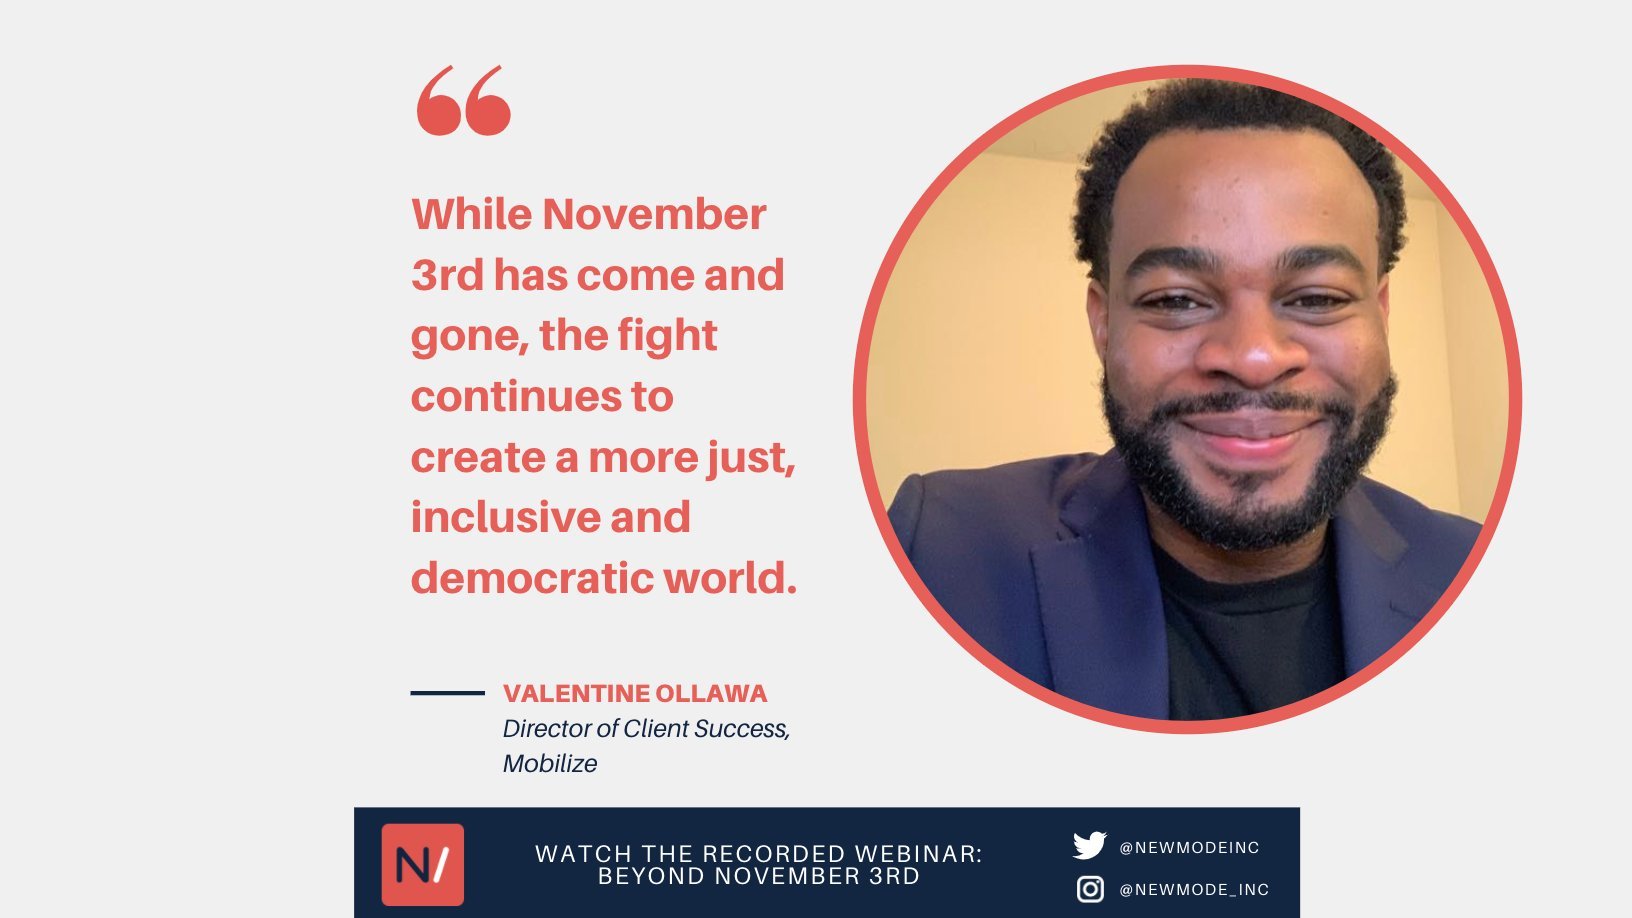 valentine ollawa quote post-election webinar